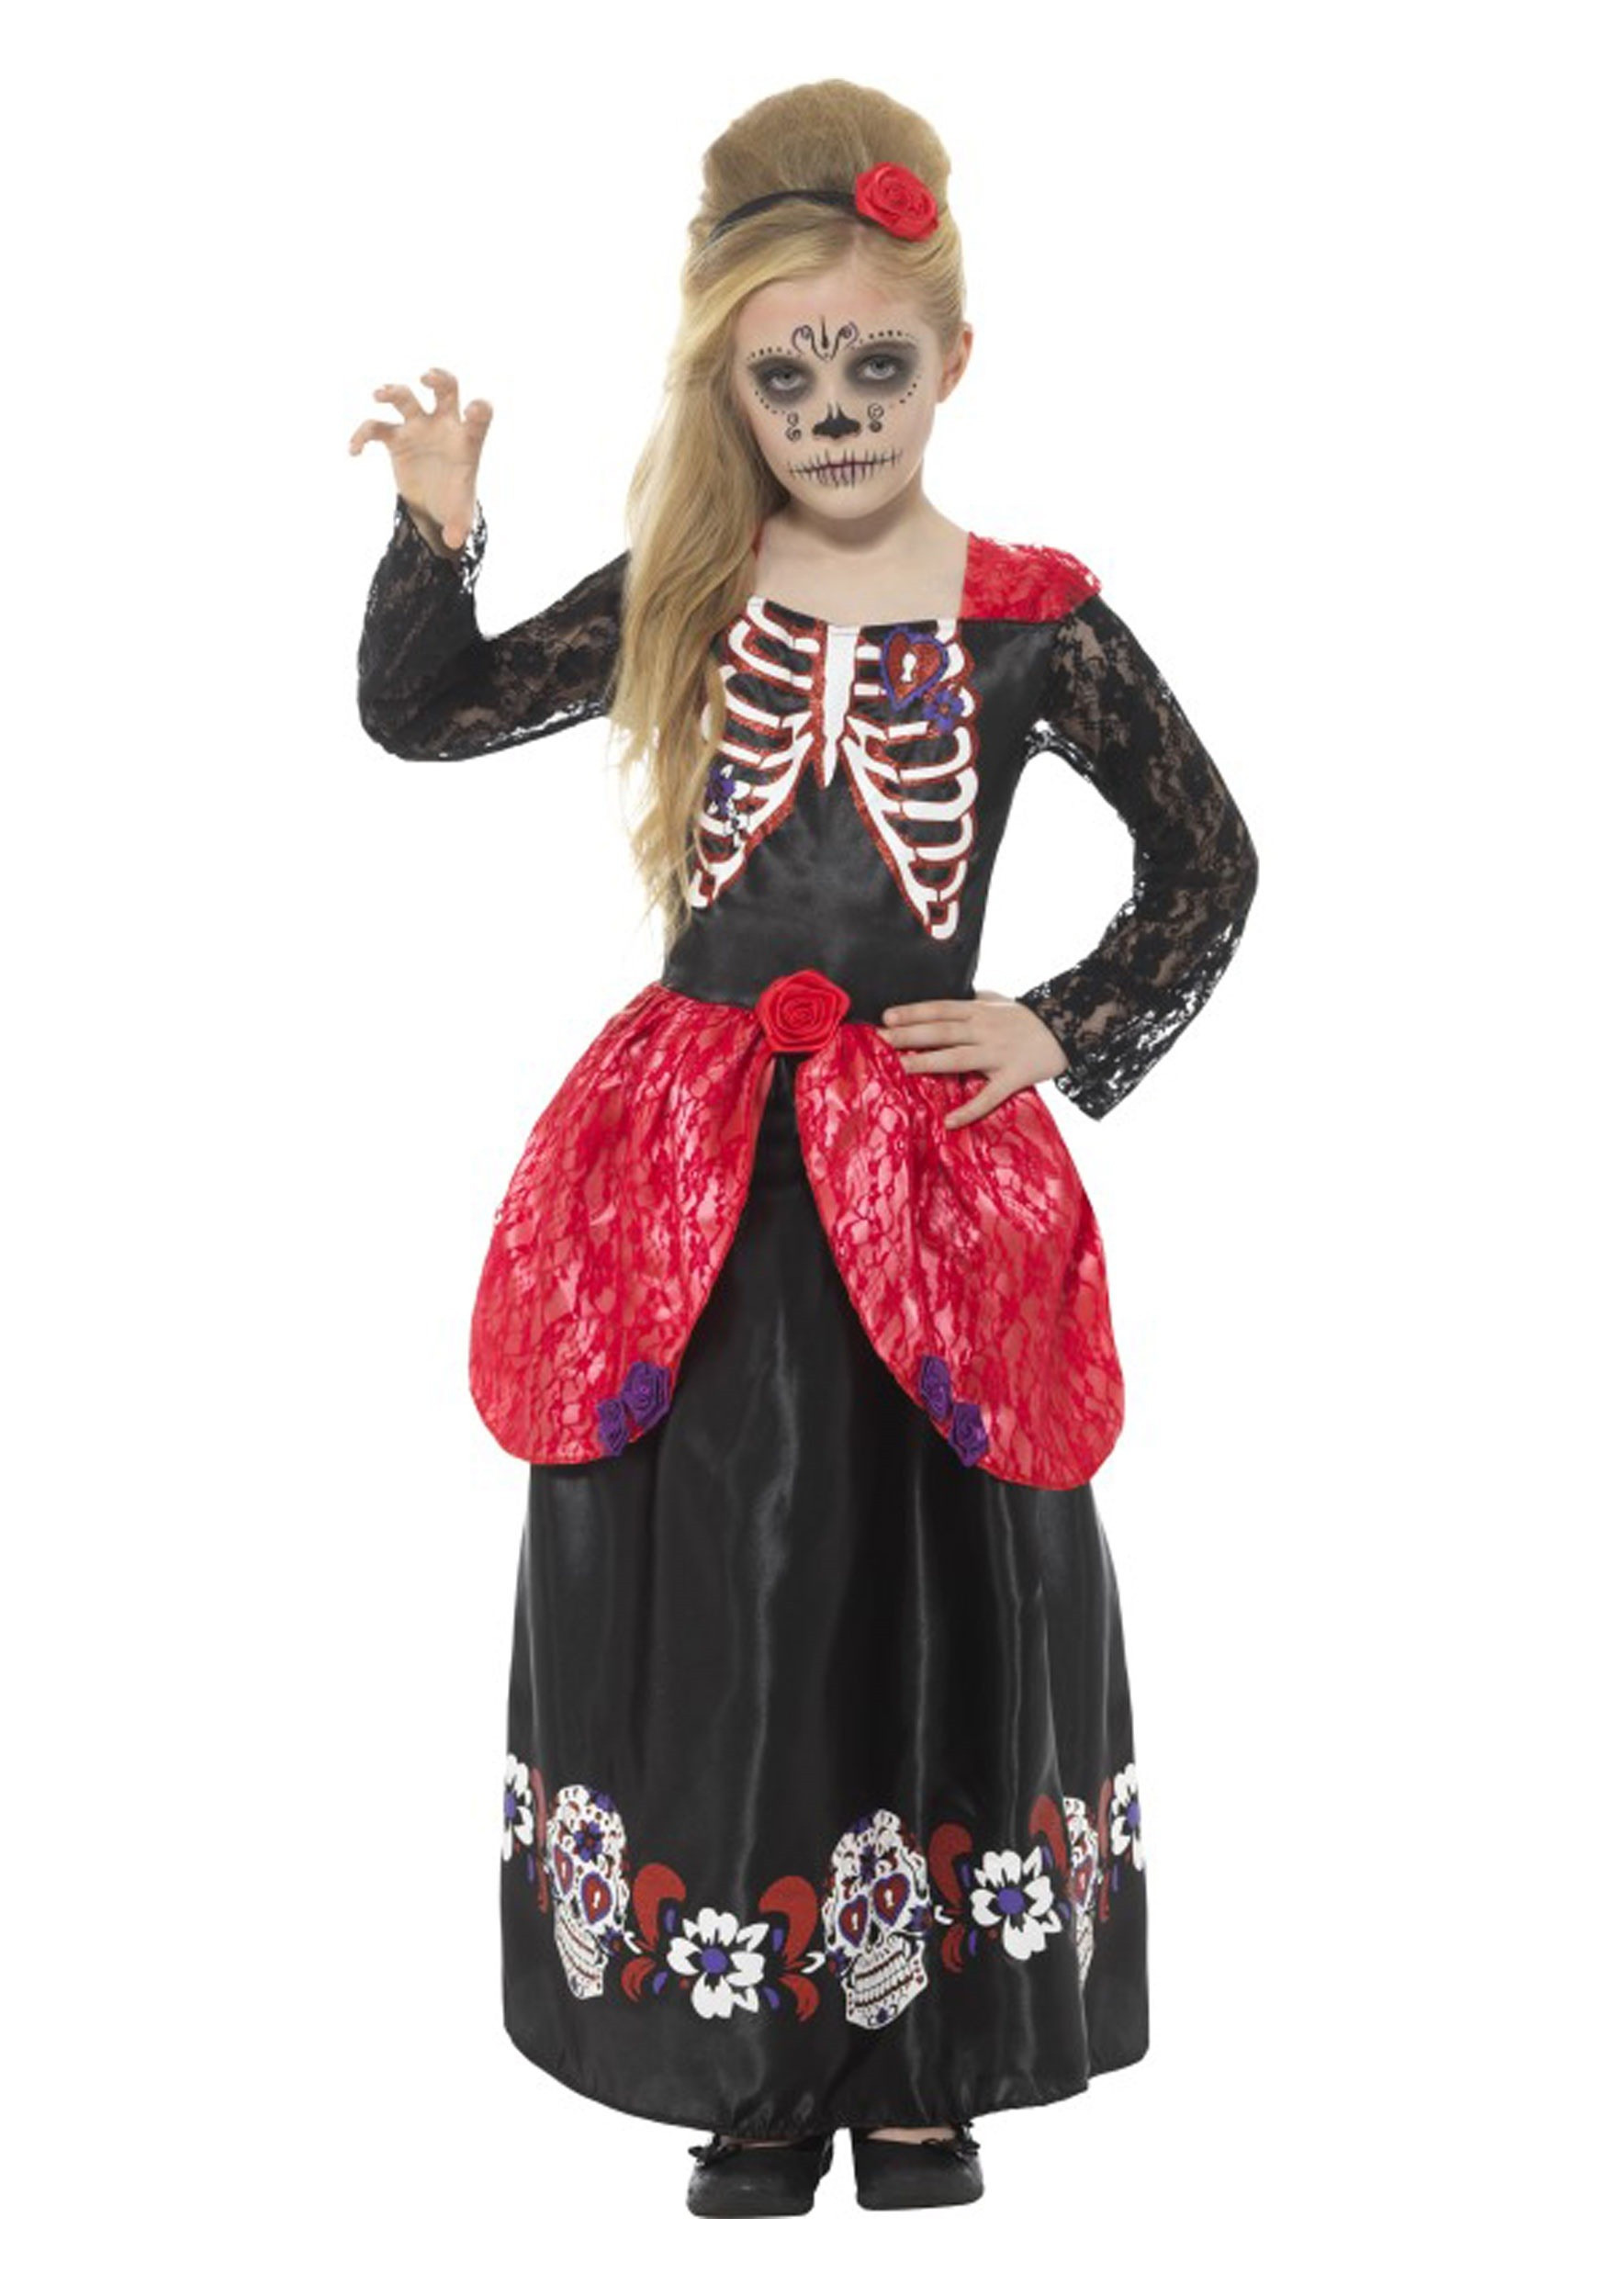 Day Of The Dead Halloween Costume Ideas
 Day of the Dead Costume for Girls